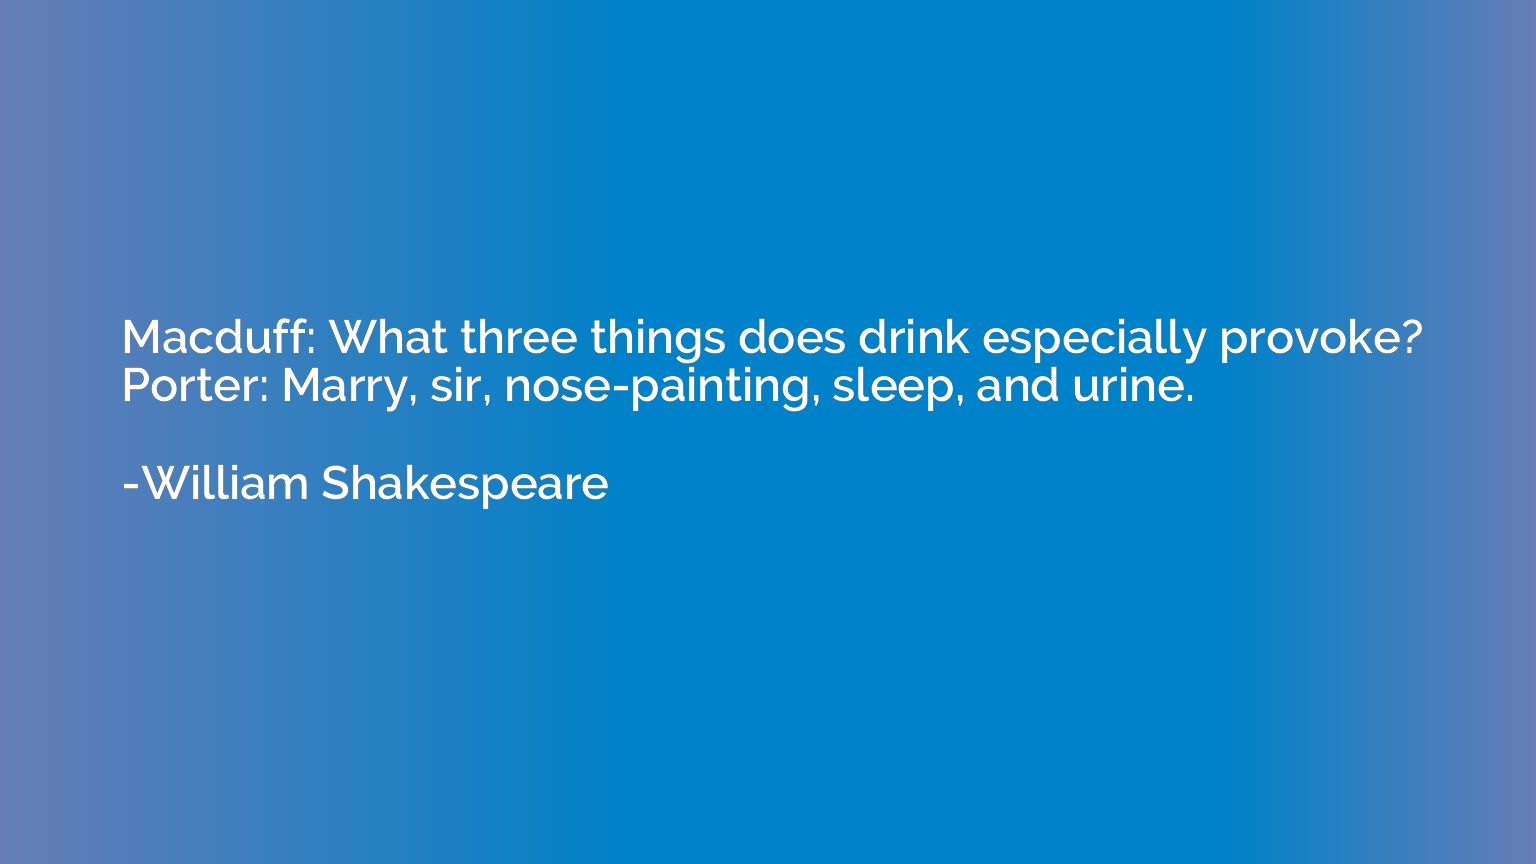 Macduff: What three things does drink especially provoke? Po